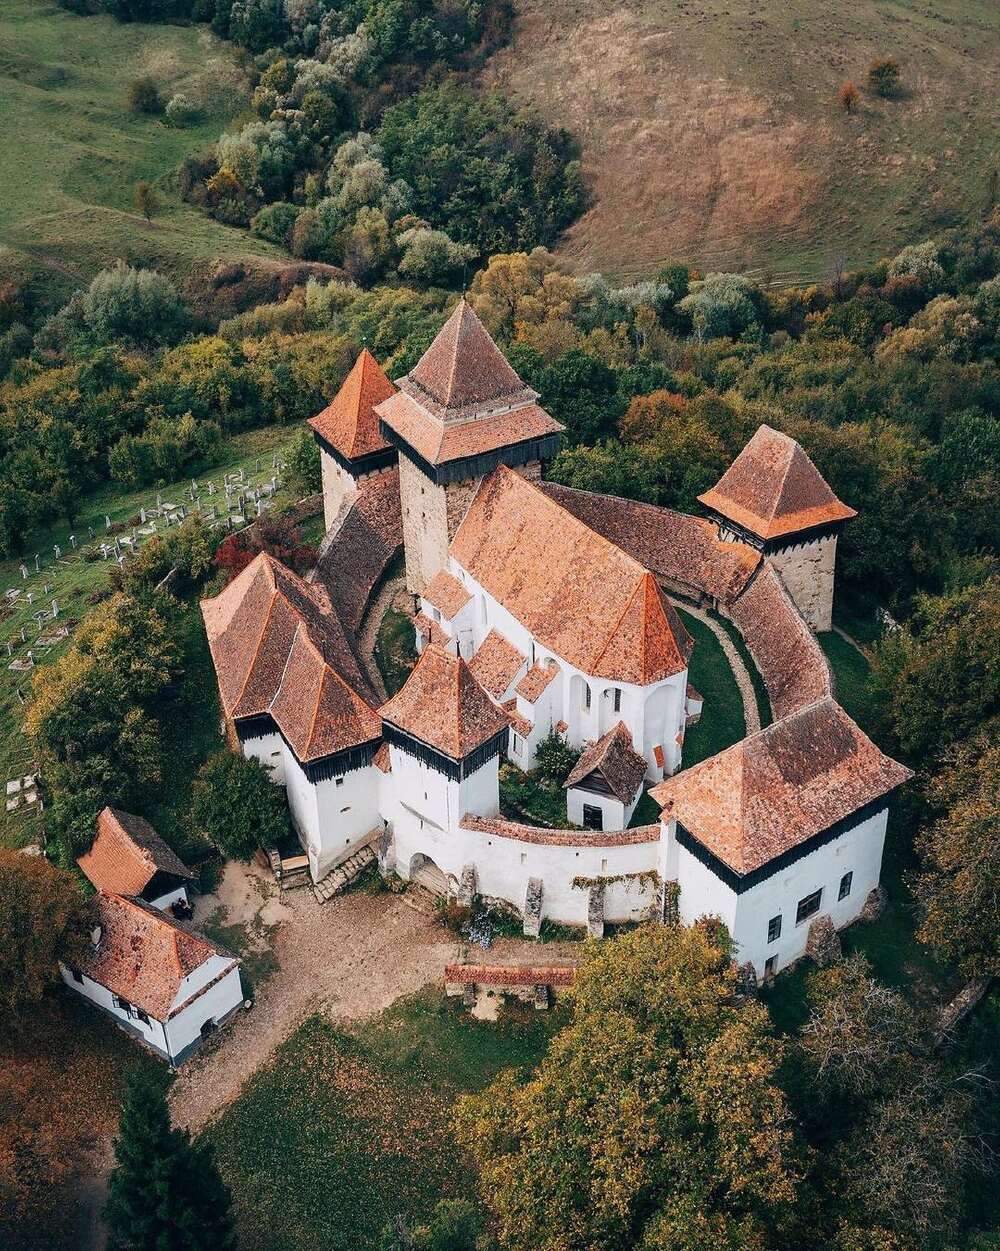 Top 10 Attractions & Must-See Sights of Transylvania